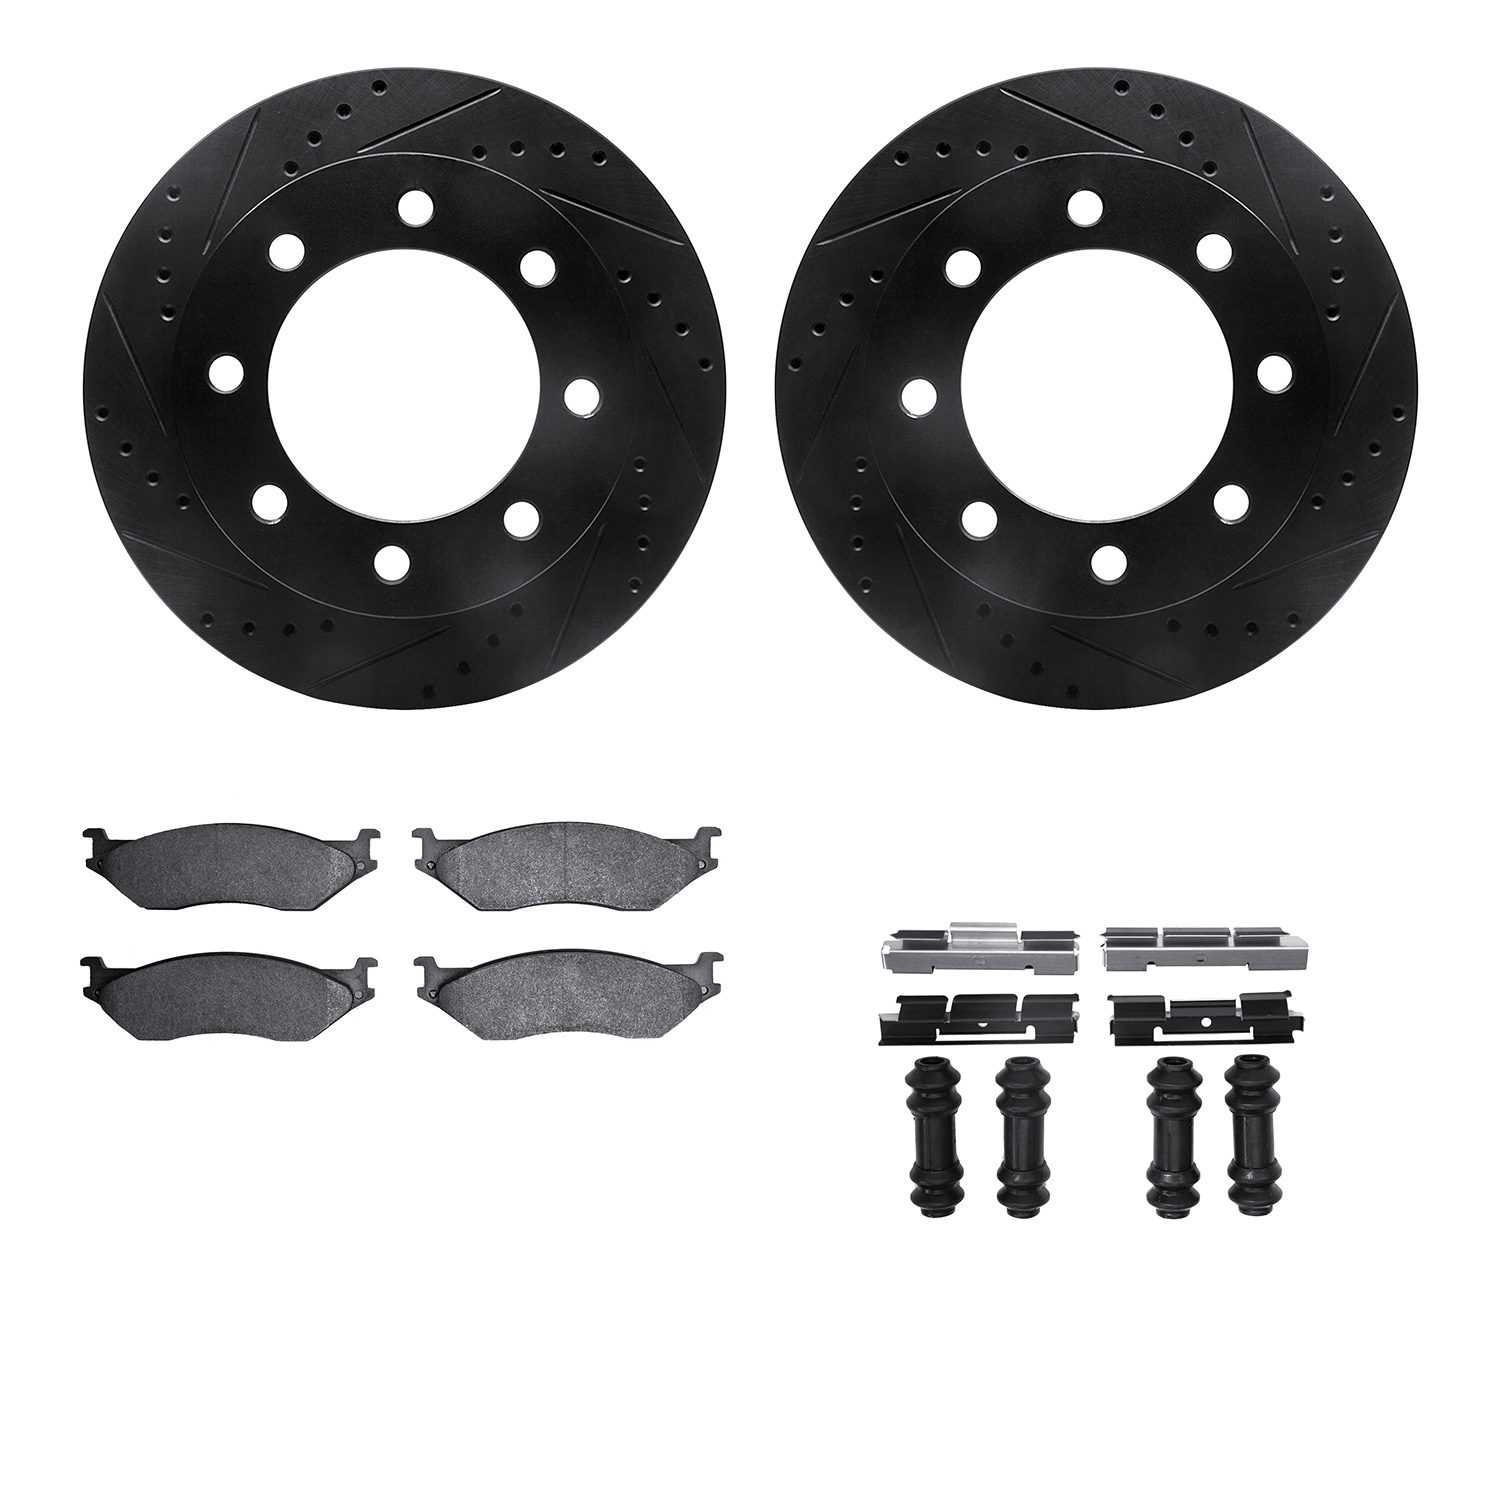 8412-54044 Drilled/Slotted Brake Rotors with Ultimate-Duty Brake Pads Kit & Hardware [Black], 1999-2001 Ford/Lincoln/Mercury/Maz